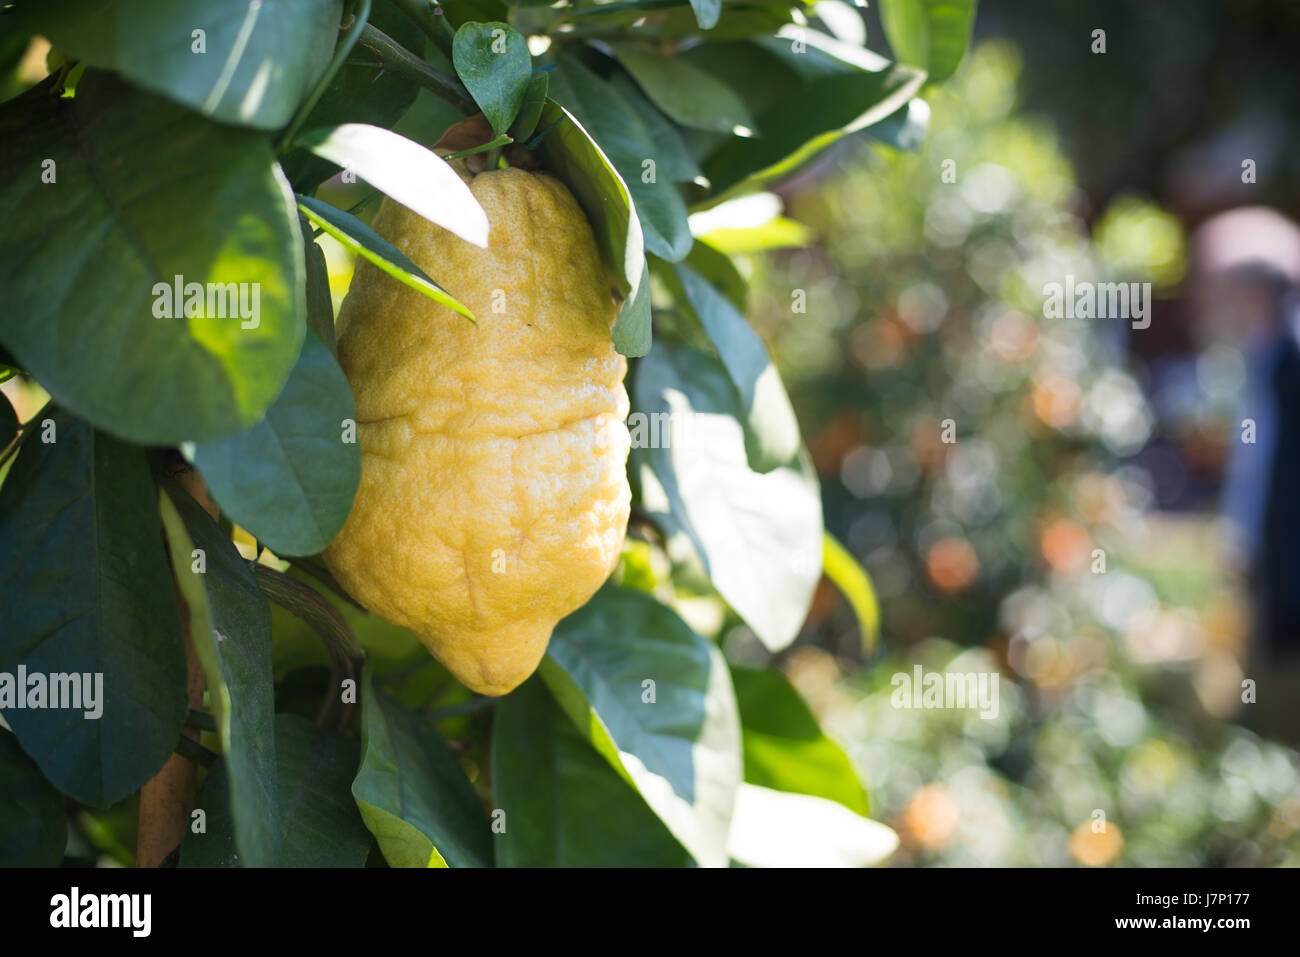 Citron fruit close up on green cedar tree branch and leaves, selective focus, copy space on the right Stock Photo